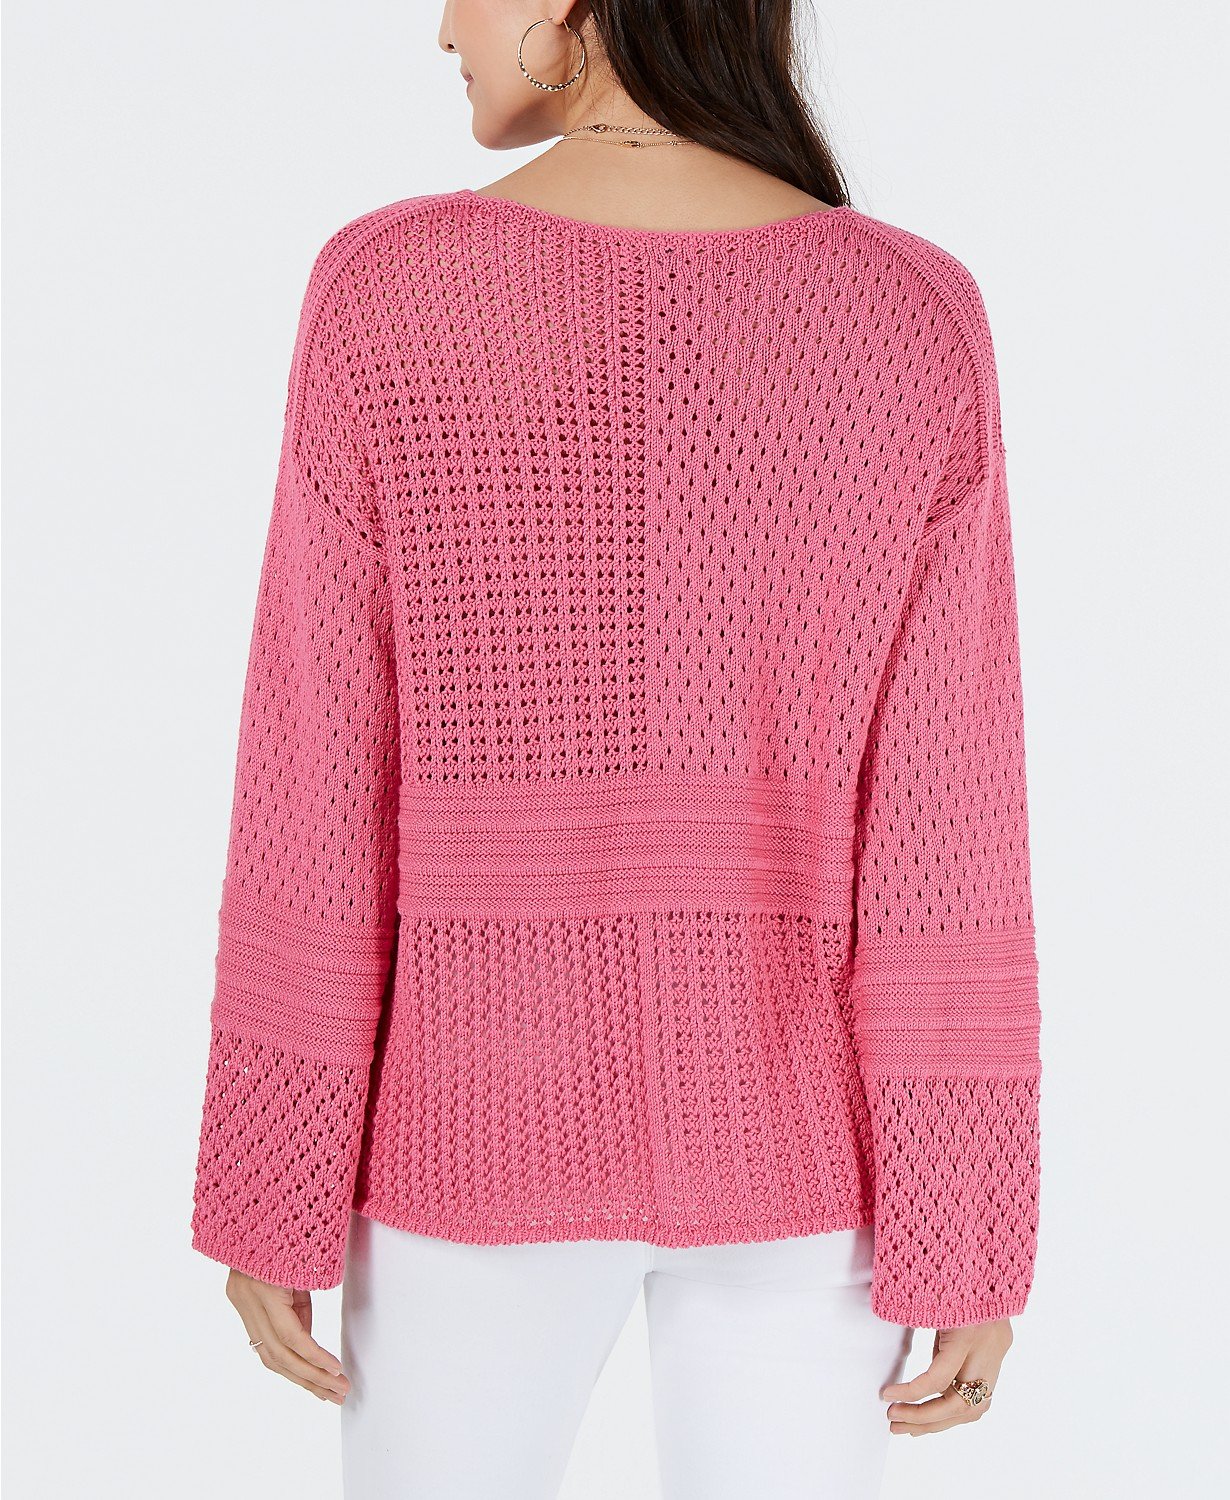 Style Co Patchwork-Stitch Crocheted Swe Berry Punch L